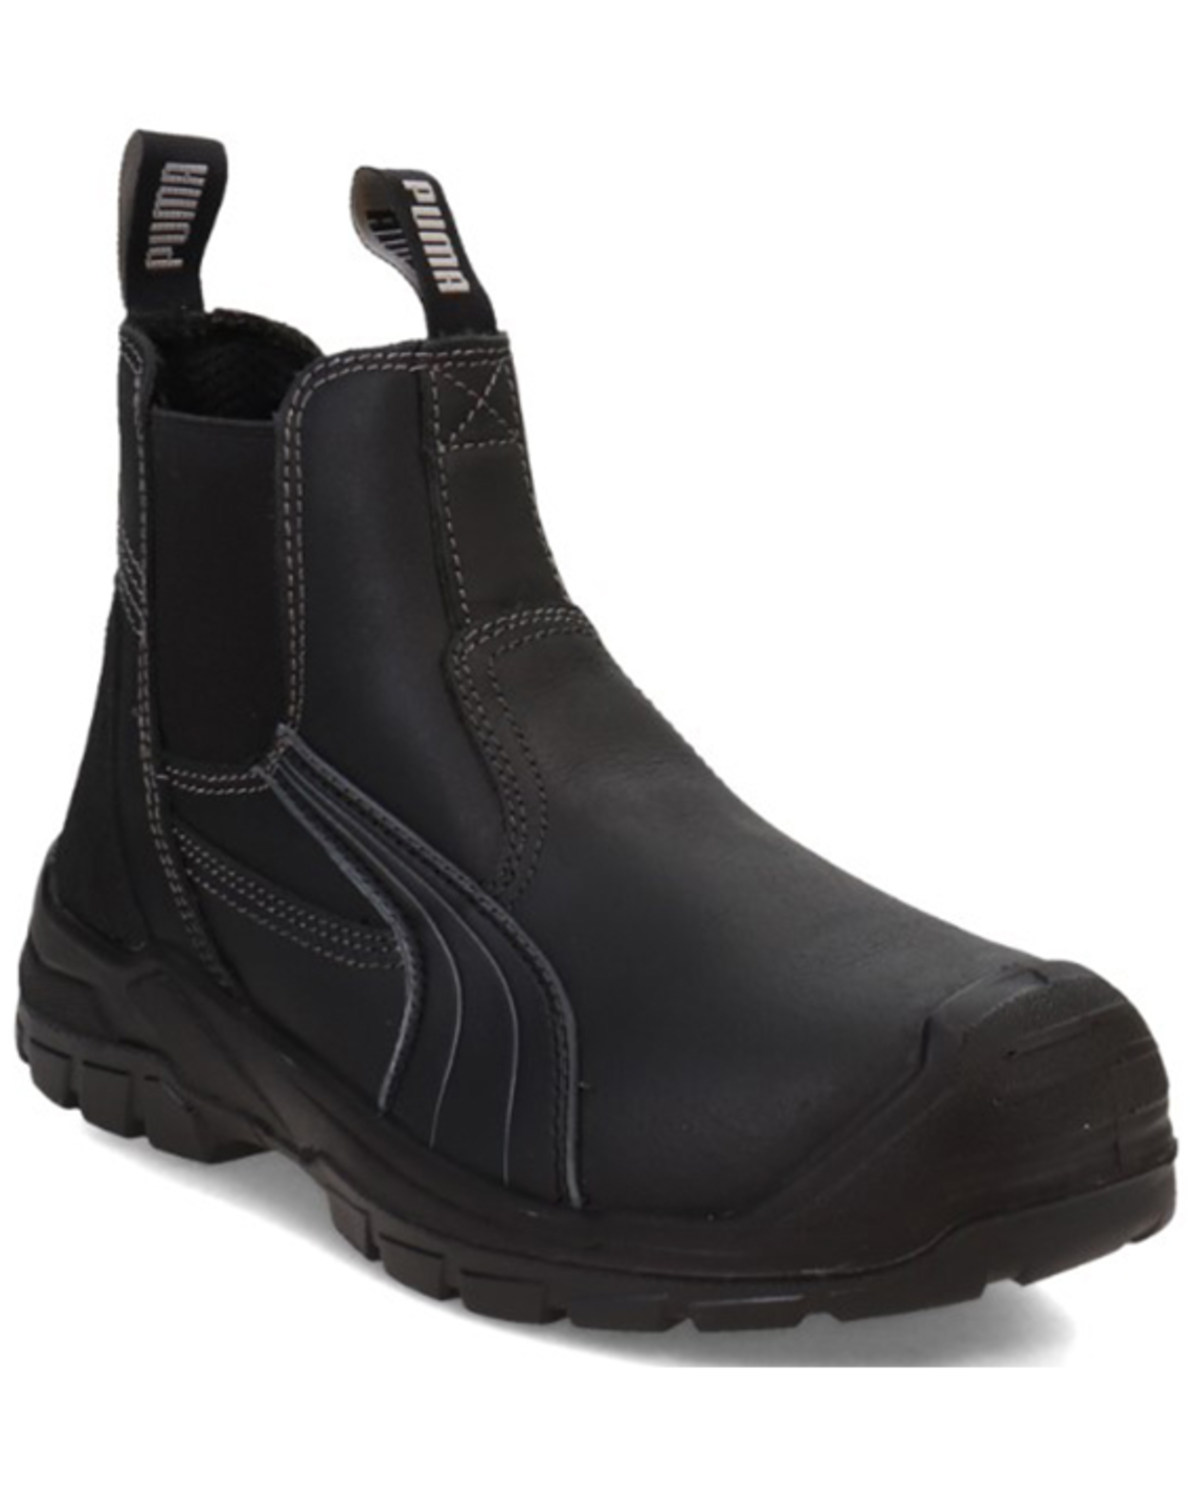 Puma Safety Men's Tanami Water Repellent Boots